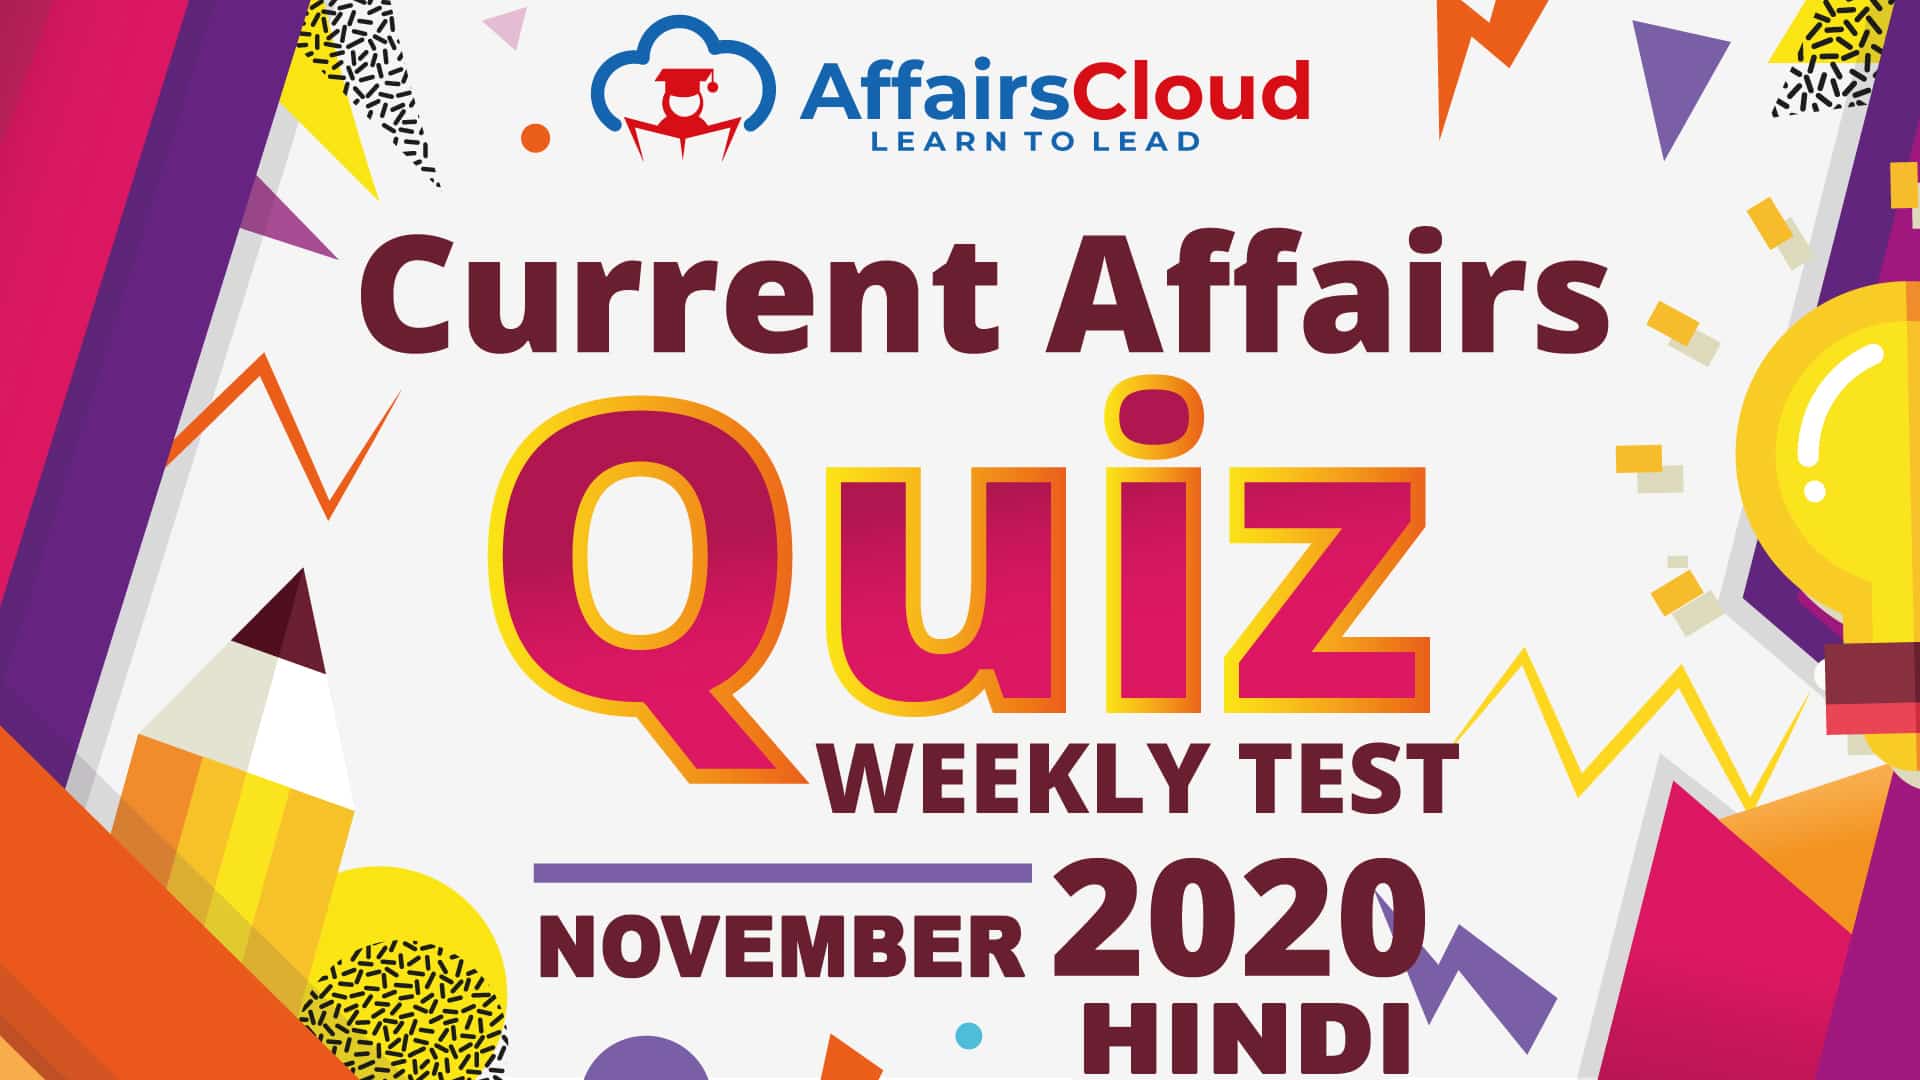 Current Affairs Weekly Test October 2020 Hindi